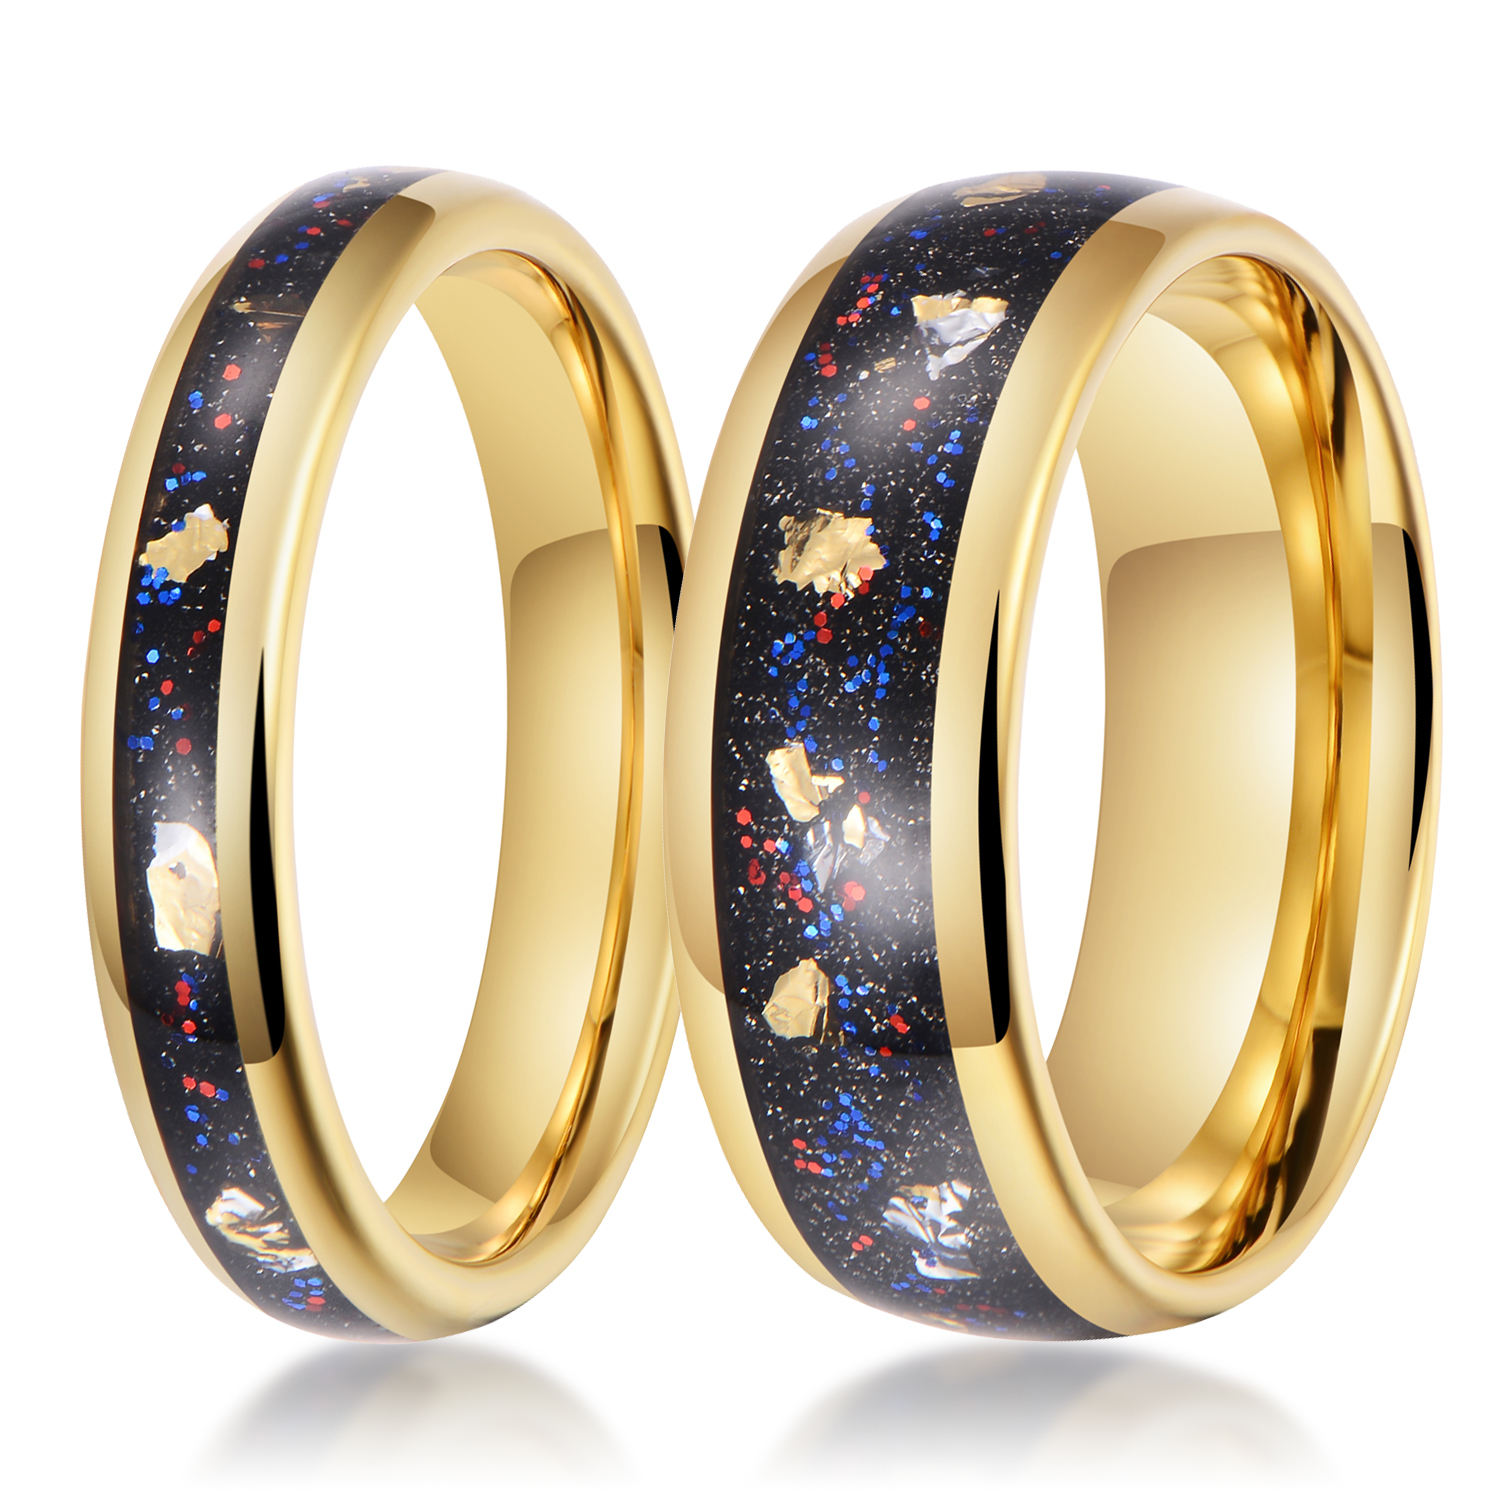 Trends 8mm New Mens Ip gold Plated Tungsten Ring wedding ring set for couples Featured Image